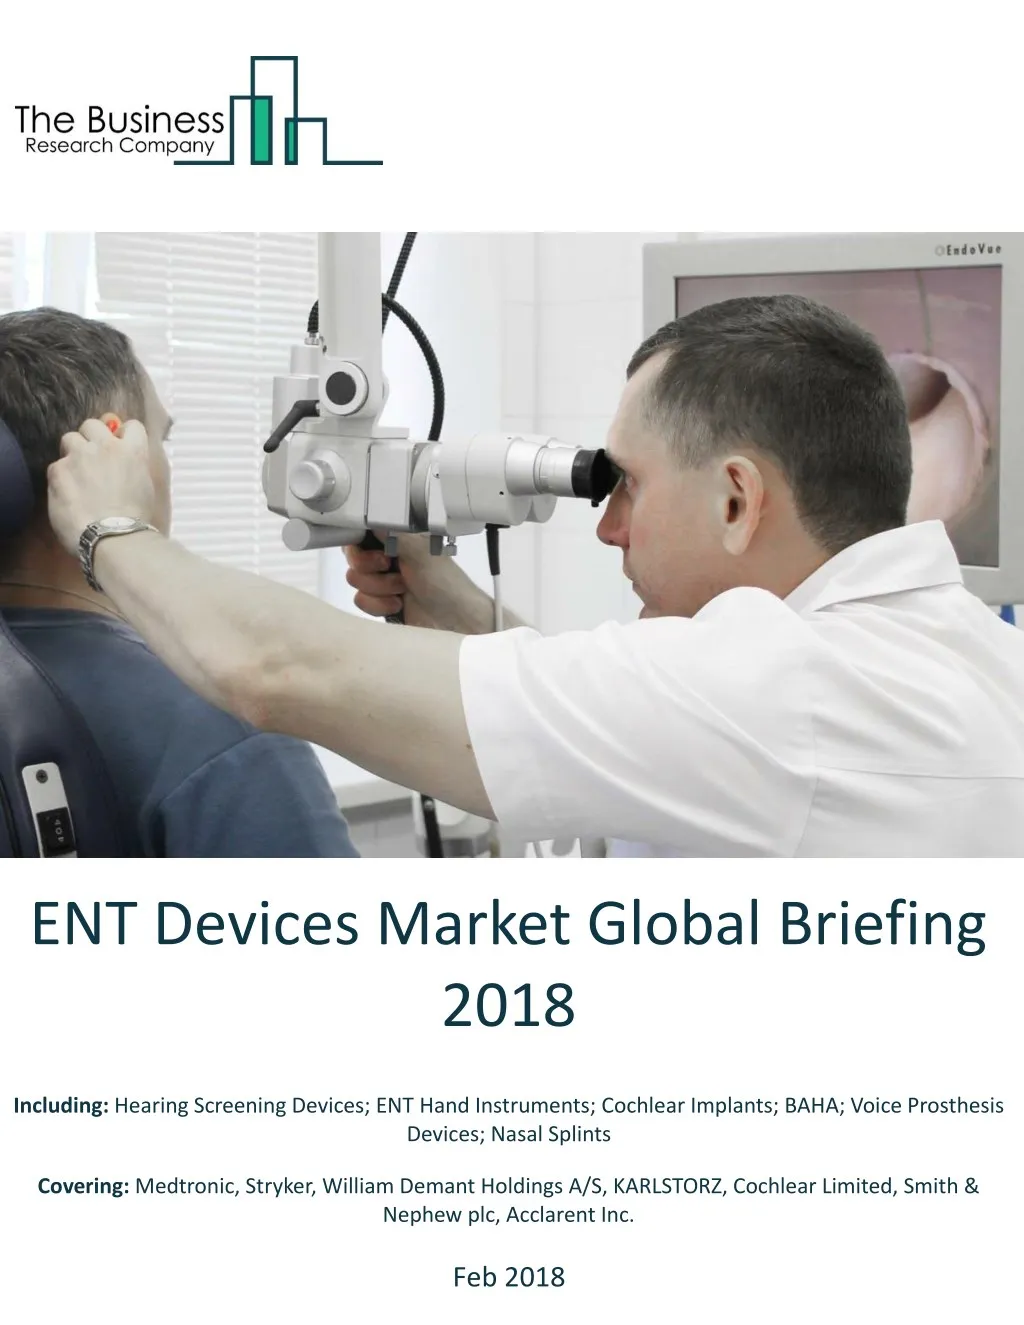 ent devices market global briefing 2018